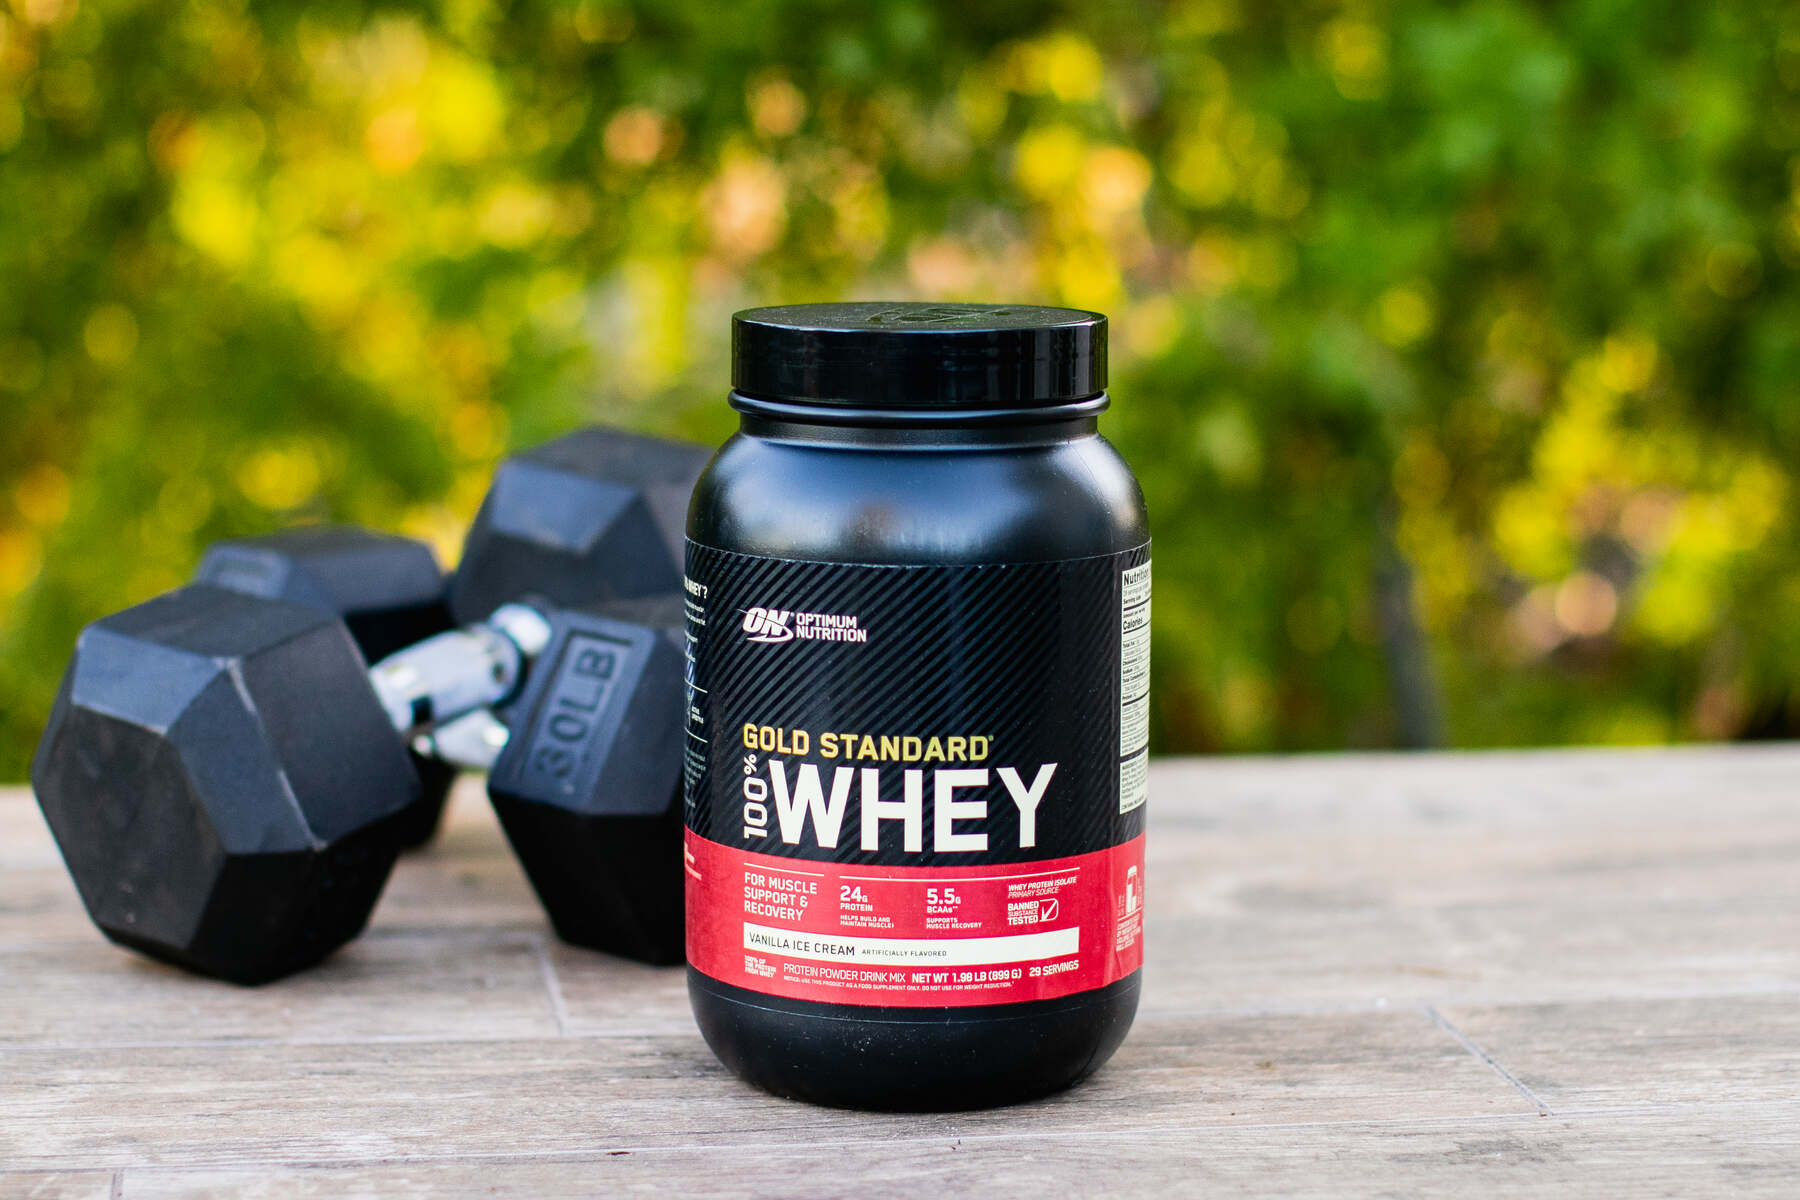 A black container of Gold Standard Whey Protein powder with a red label sits on a wooden surface next to black dumbbells with green foliage in the background